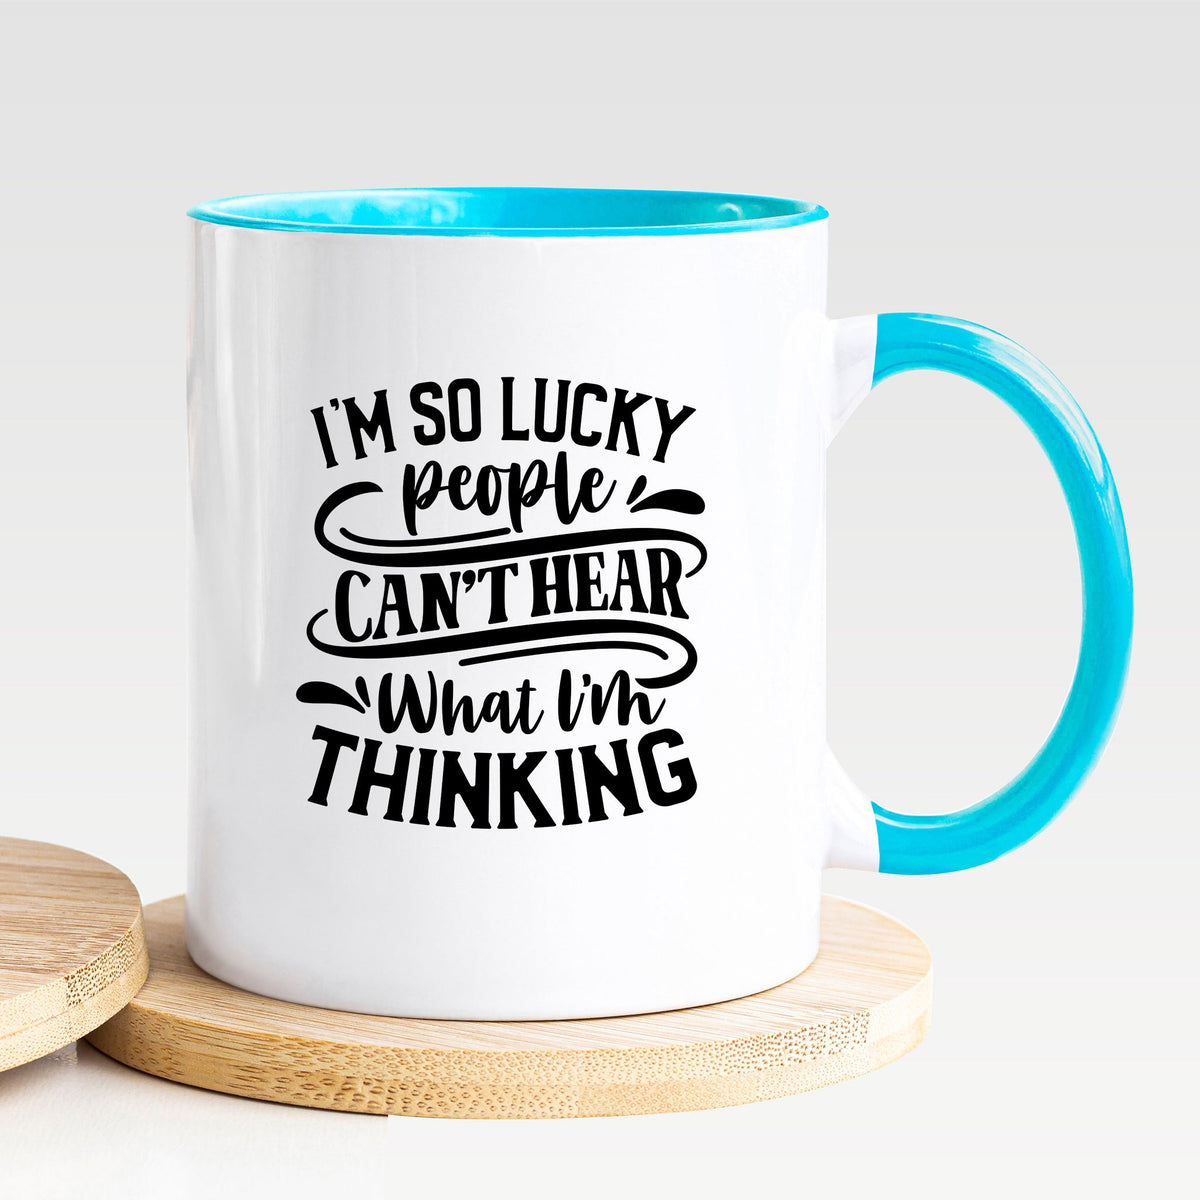 I'm So Lucky People Can't Hear What I'm Thinking - Mug